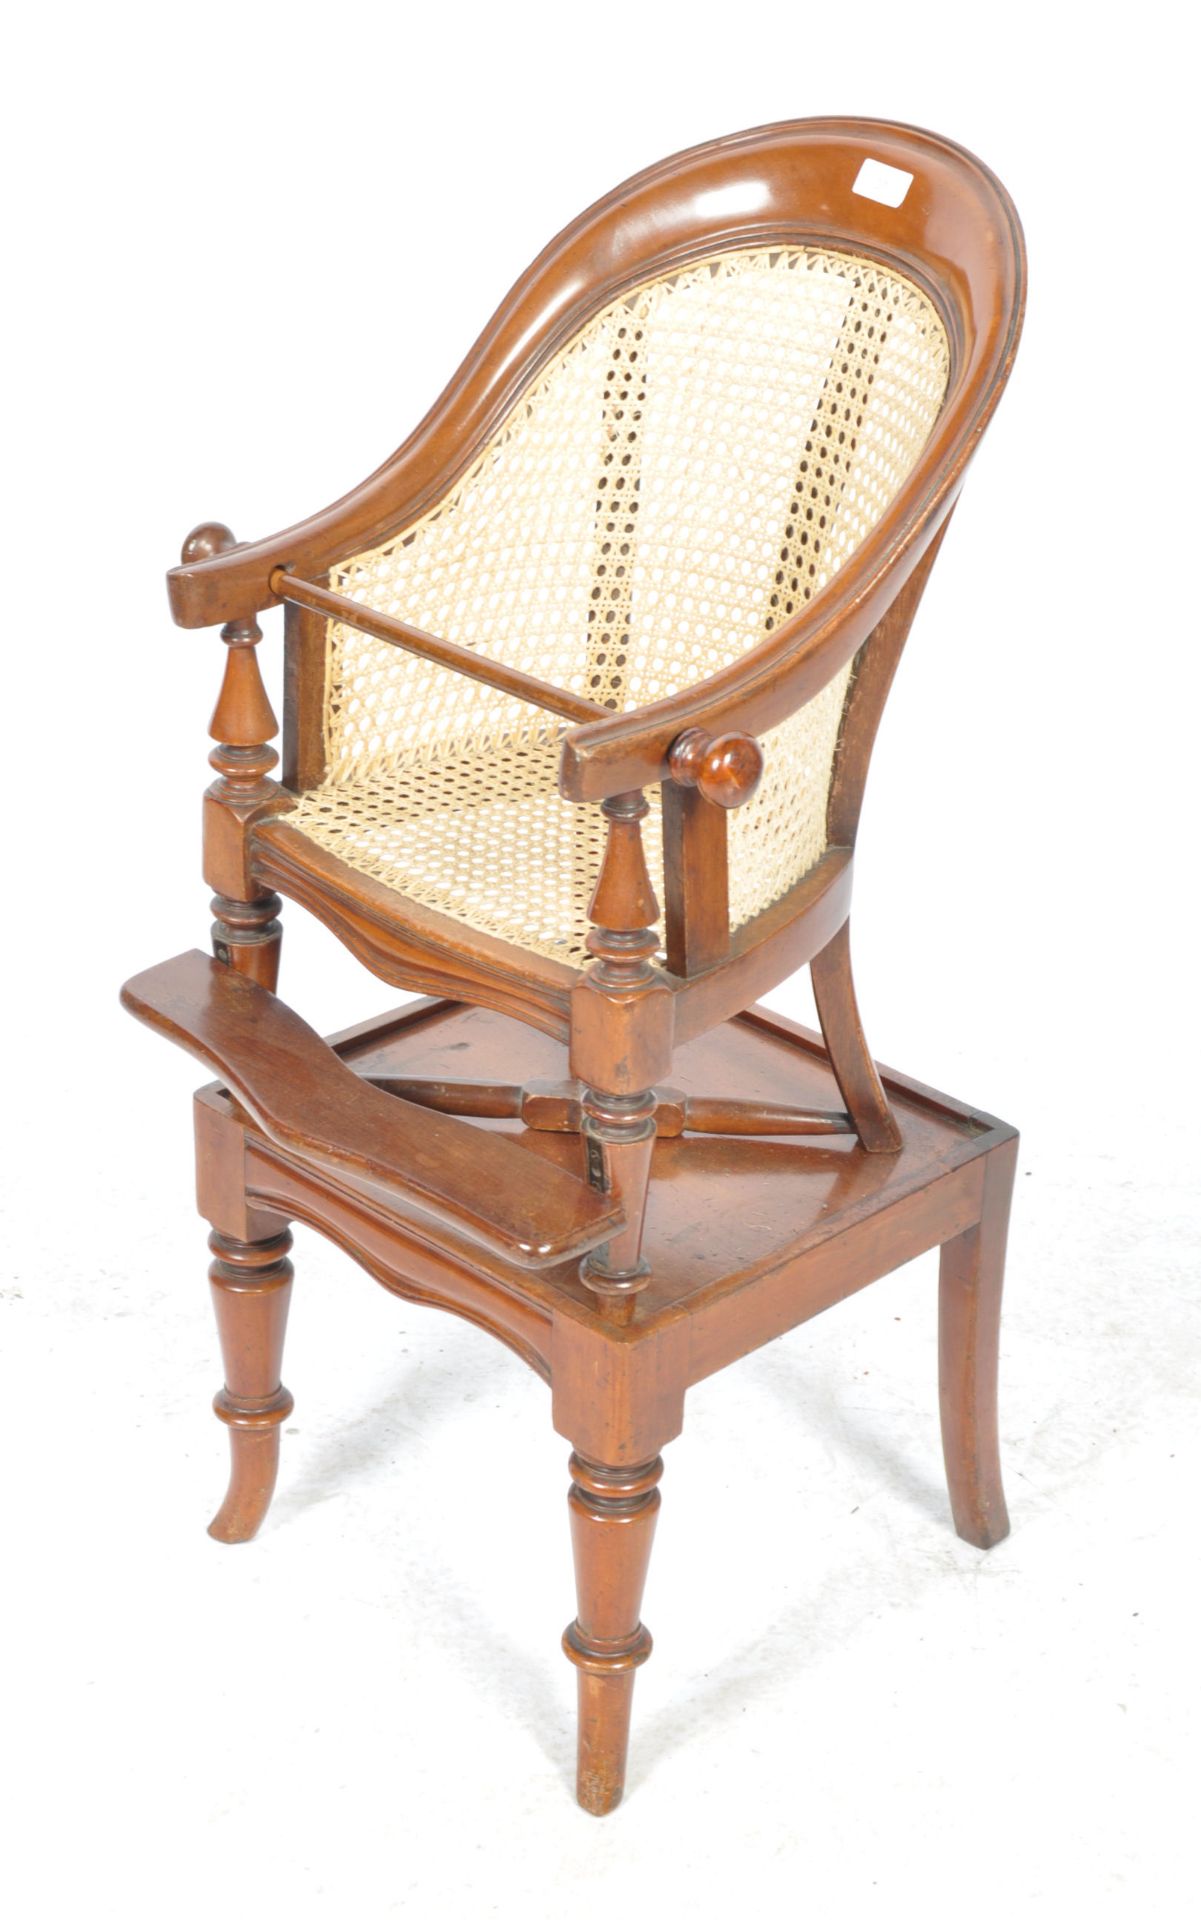 19TH CENTURY VICTORIAN ENGLISH ANTIQUE HIGH CHAIR - Image 2 of 8